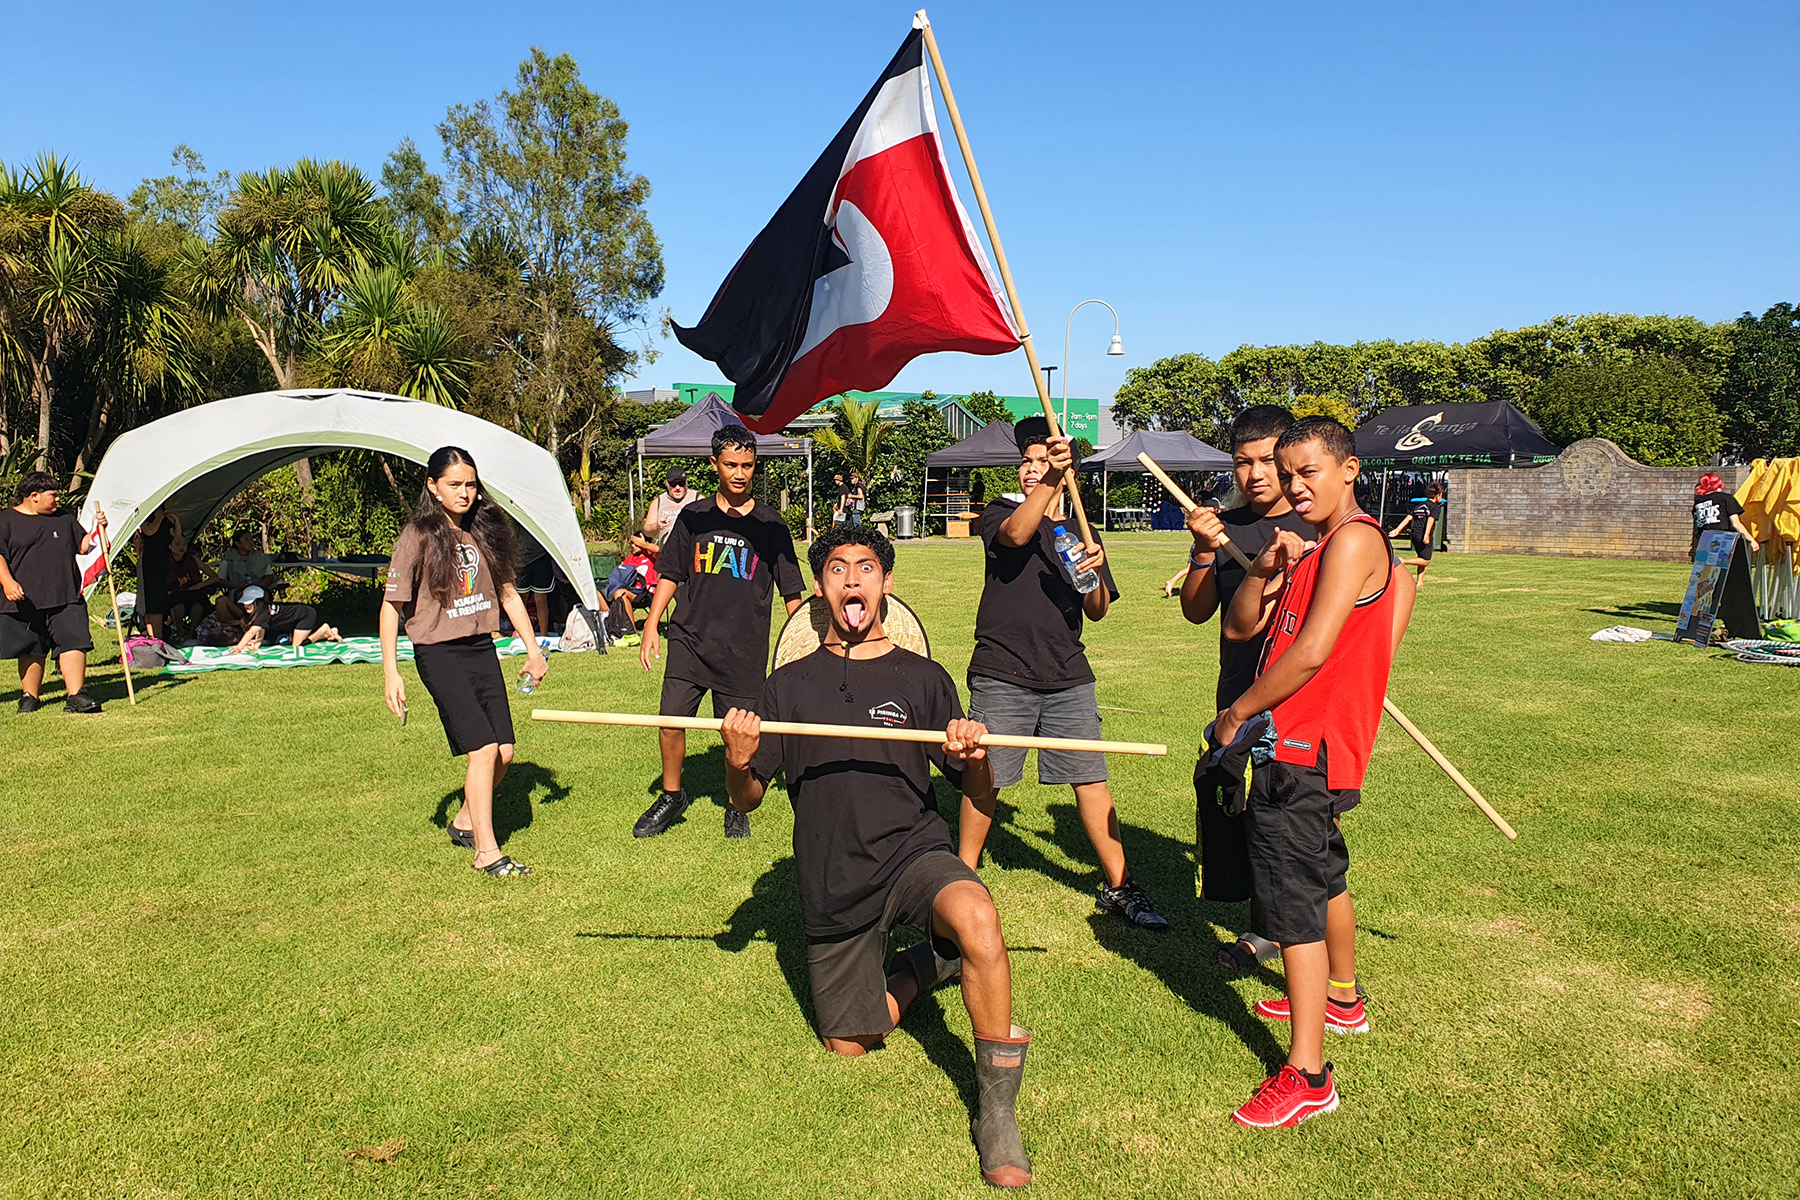 Six rangitahi pose in front of a Tino Rangitiratanga flag on grass. Tents, trees and a blue sky in the background.